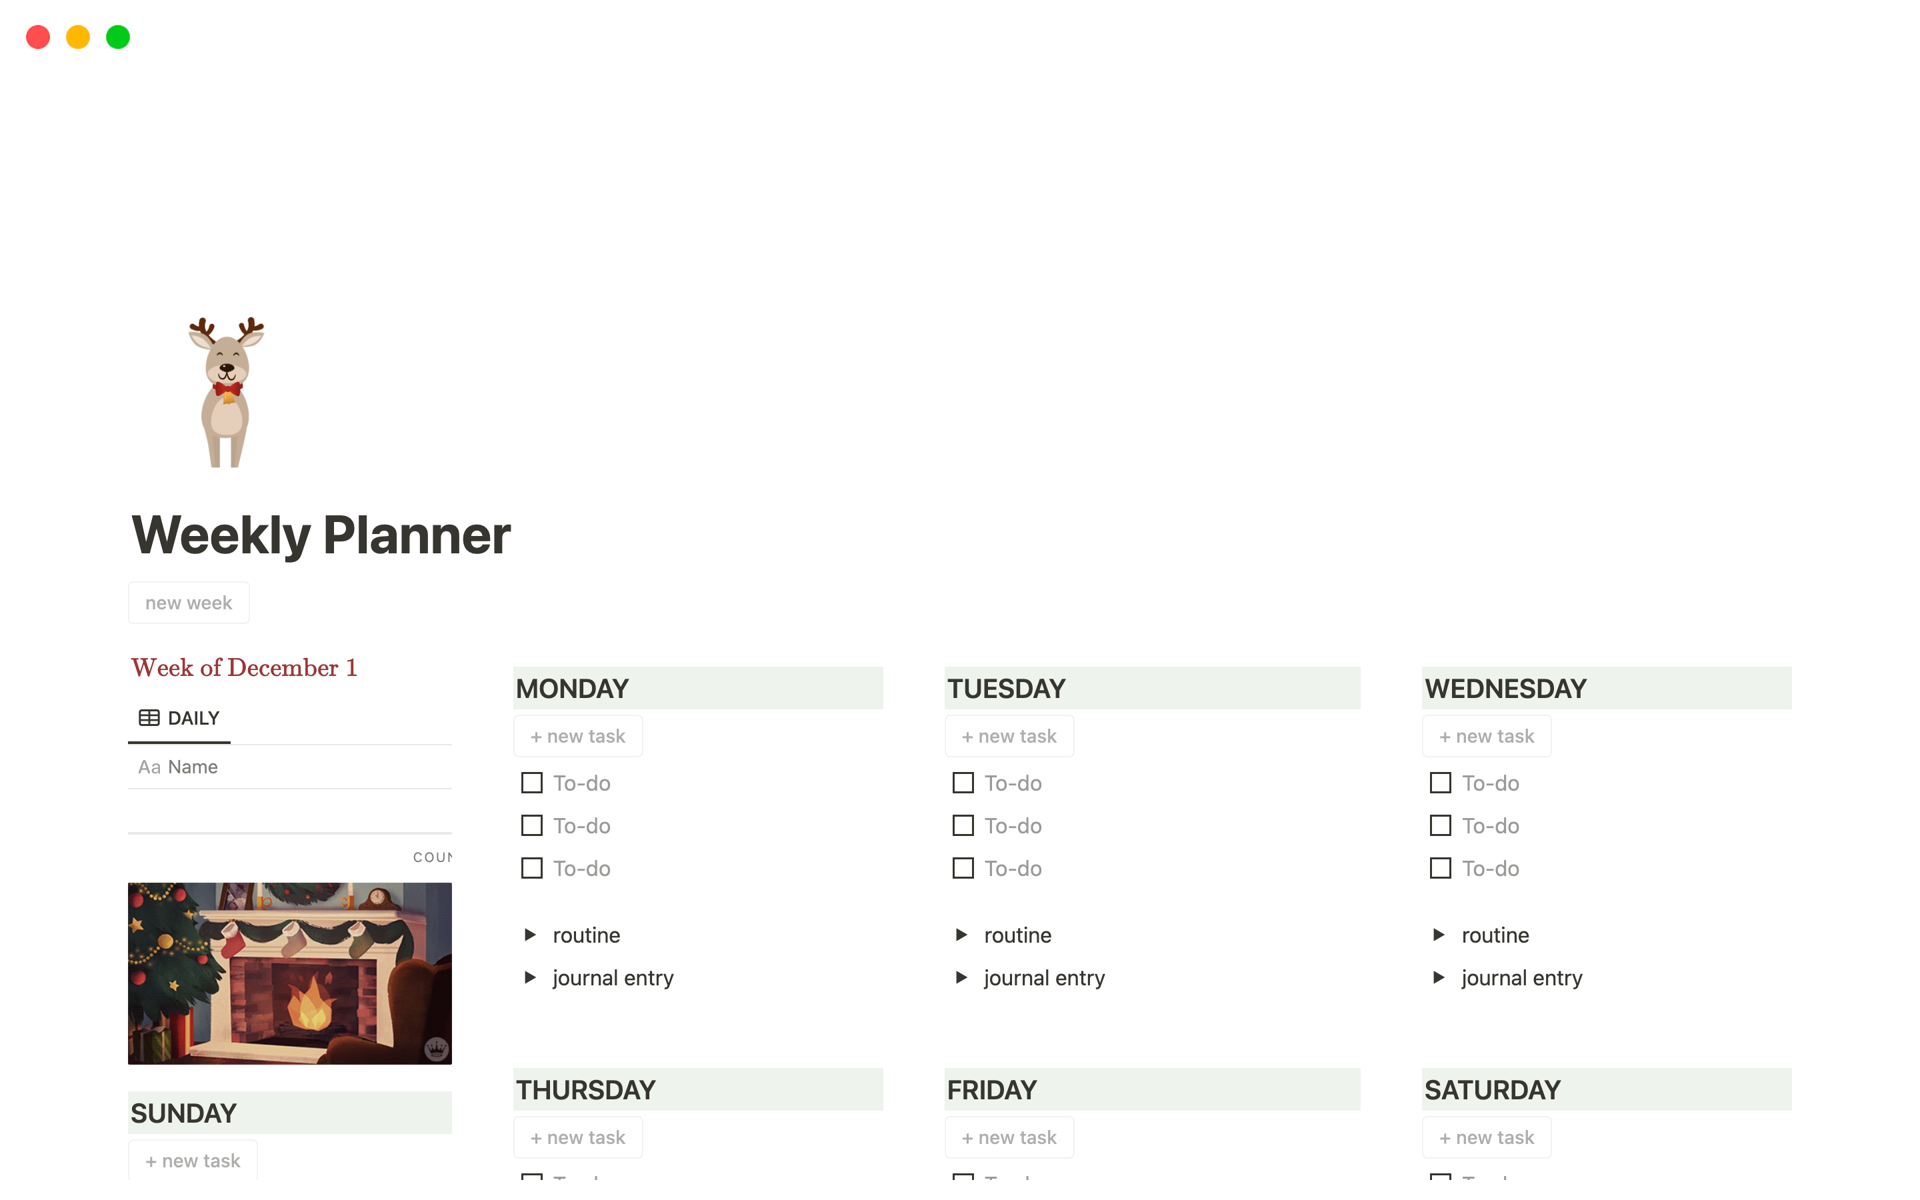 Stay organized and boost your productivity this holiday season with this Weekly Planner. Say goodbye to chaos and hello to a more efficient and structured week!